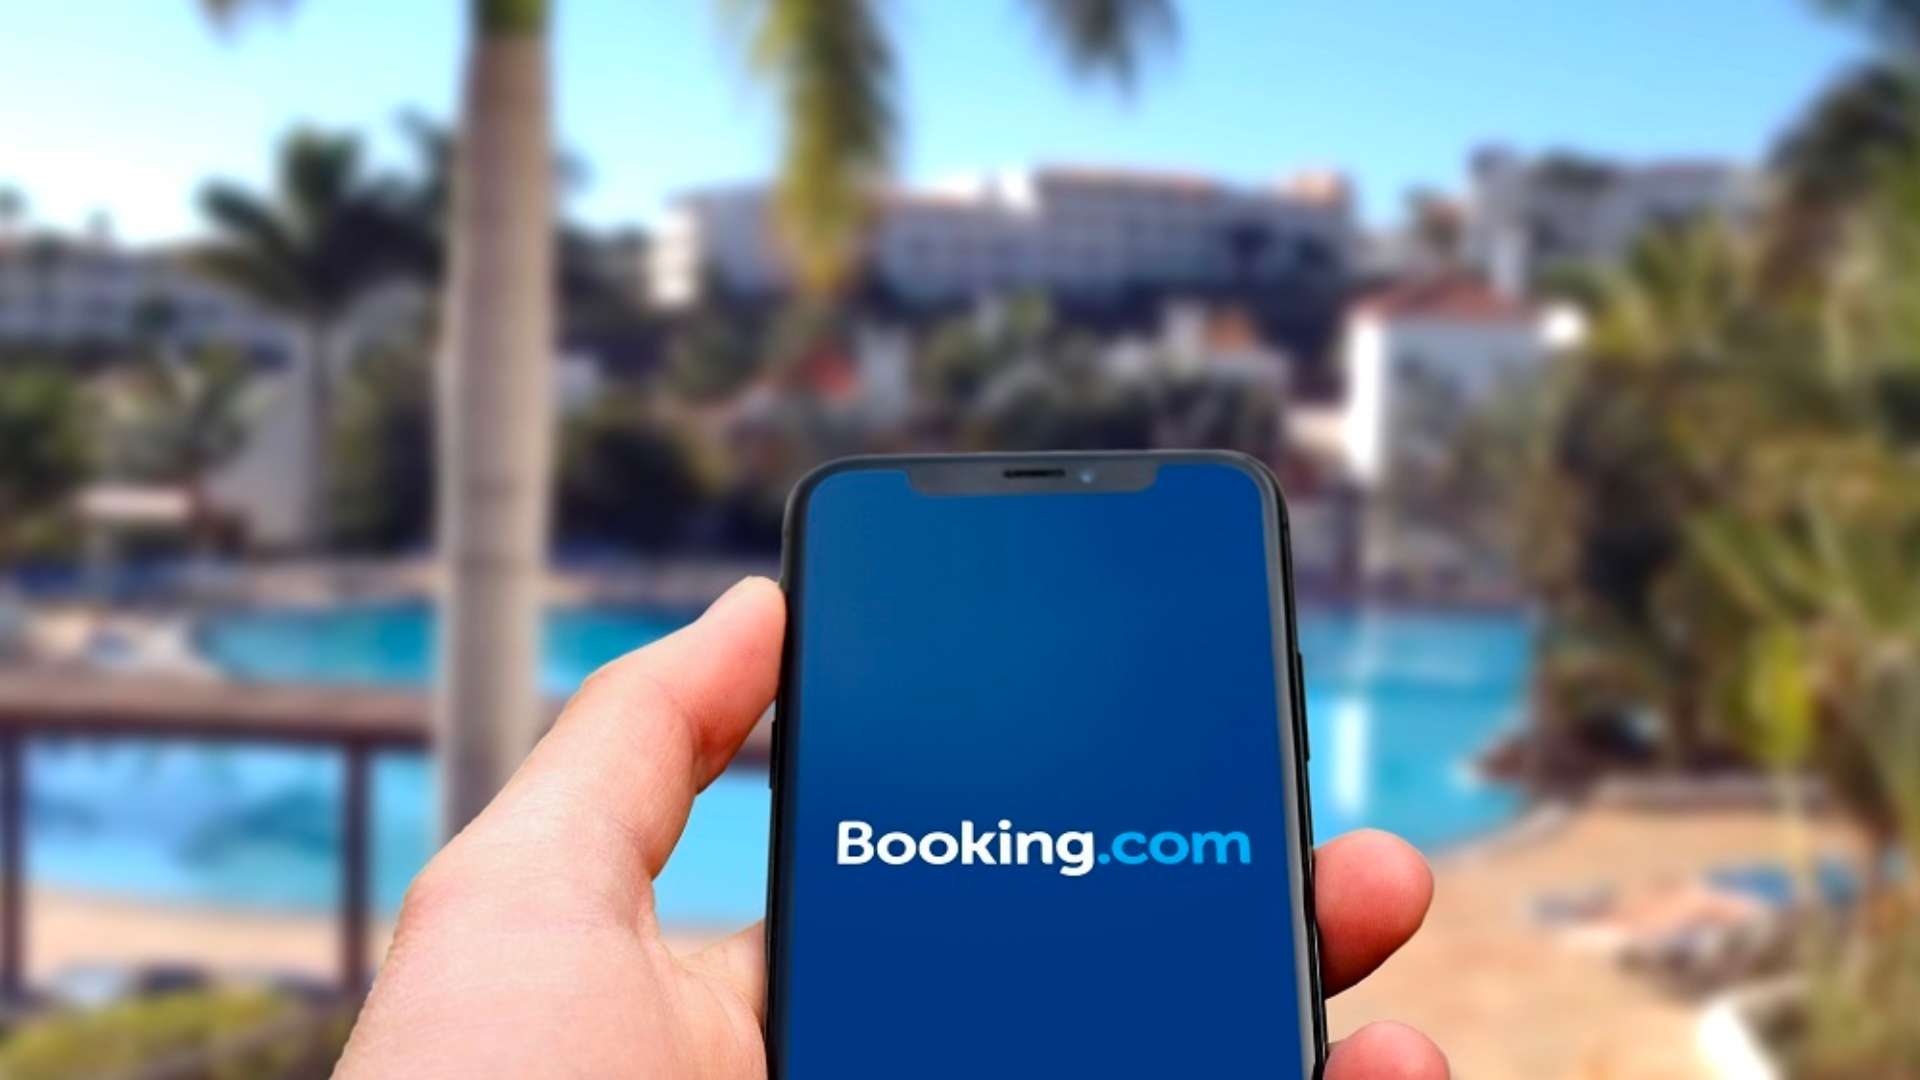 booking.com logo in white and bright blue with dark blue background on the phone that held by someone's hand with hotel landscape as a blurred background